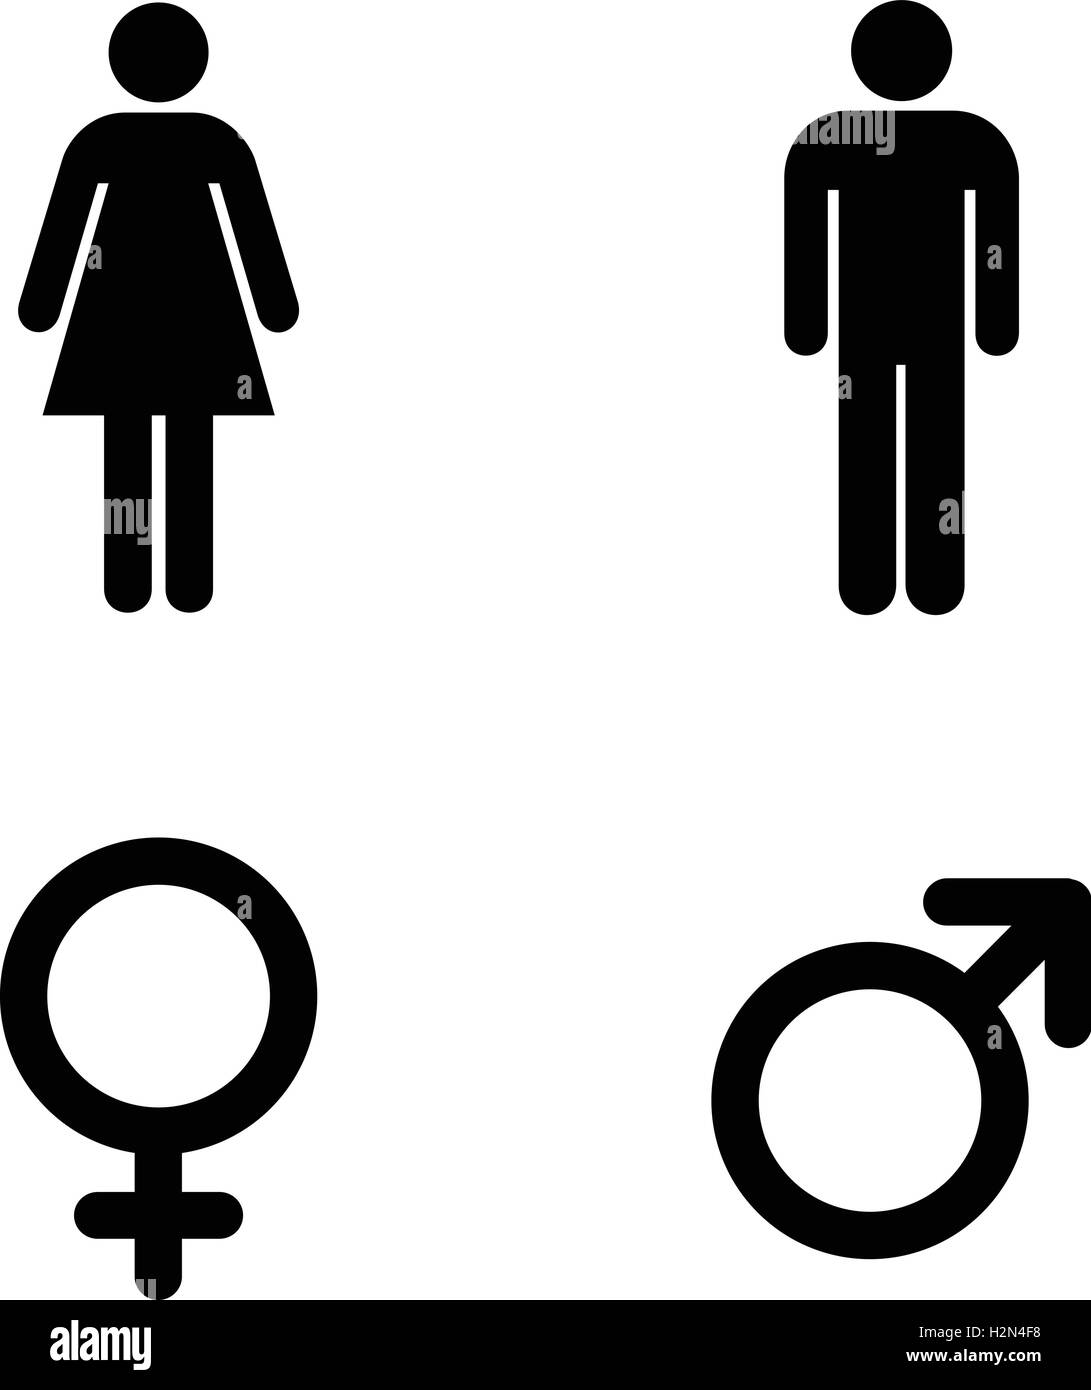 Restroom sign. A man and a lady toilet sign. People icon. Female and male black isolated symbols. Vector illustration. Stock Vector